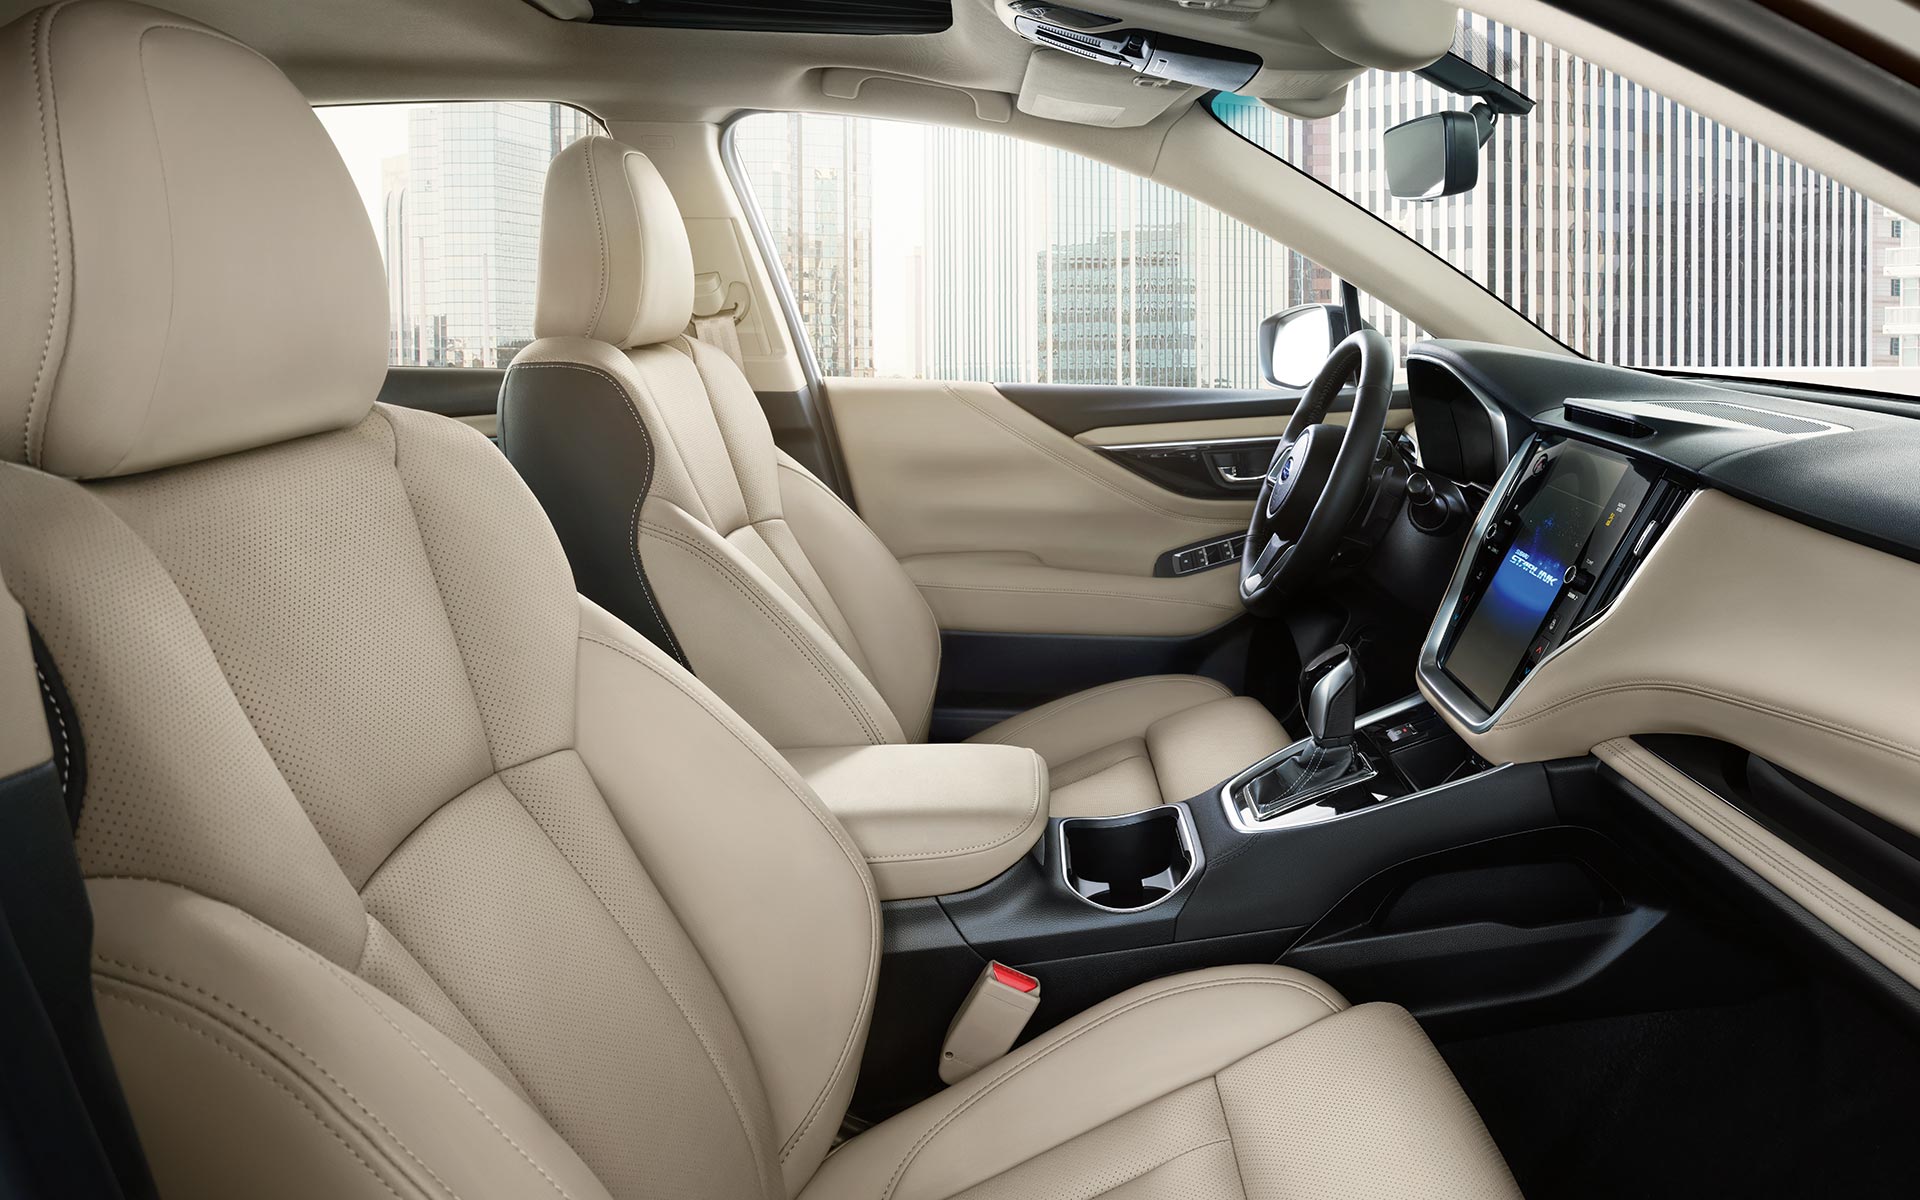  The expansive view of the interior of the 2022 Subaru Legacy.